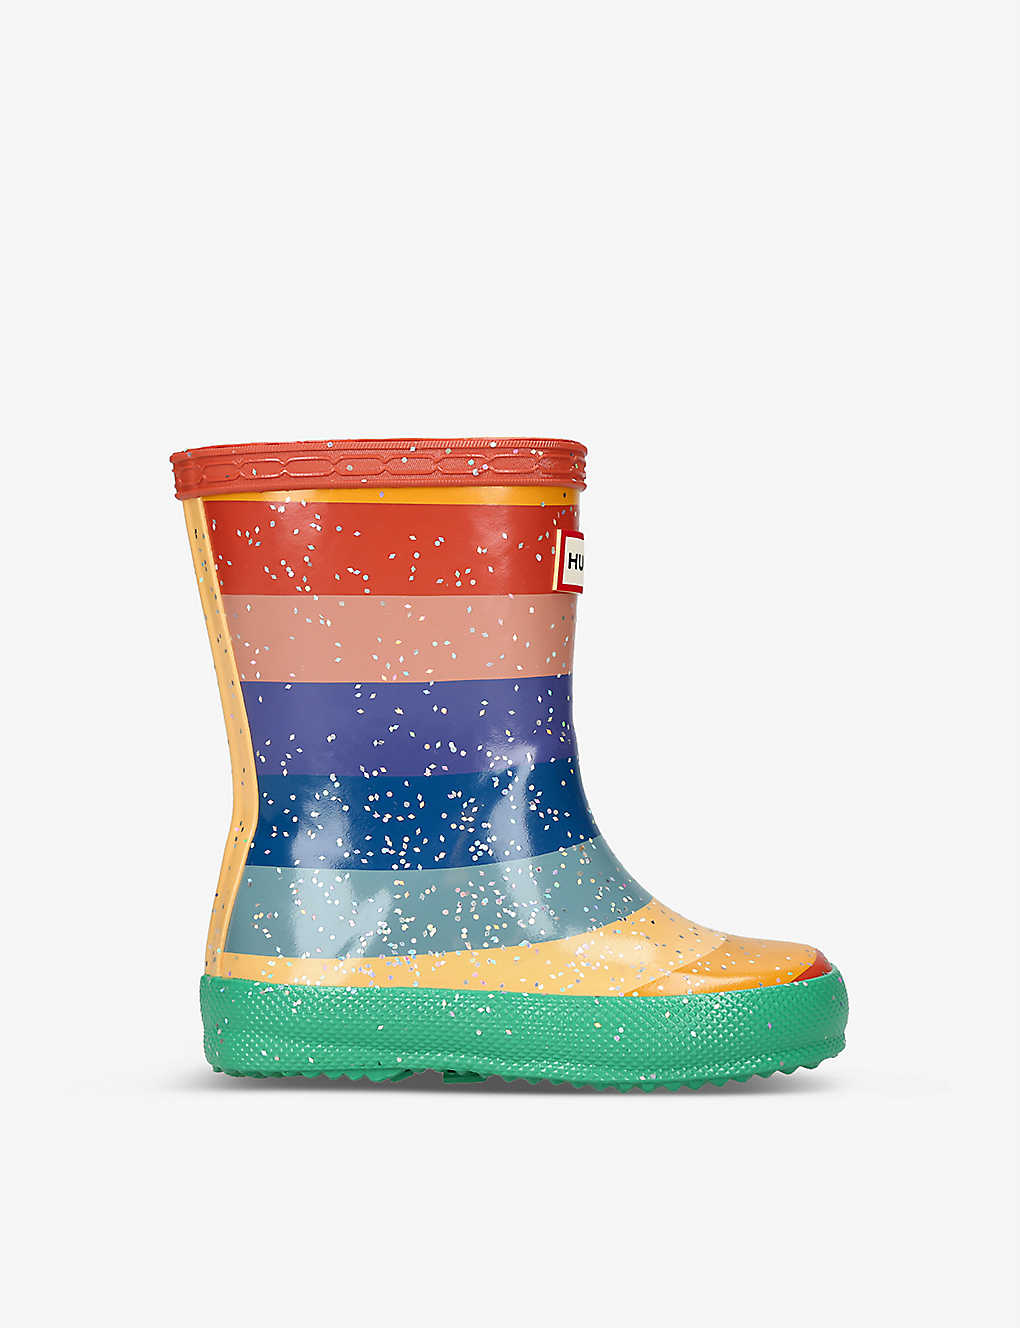 Size Selfridges & Co Girls Shoes Boots Rain Boots Kids first classic Wellies 2-7 years EUR 22 /5.5 UK KIDS 